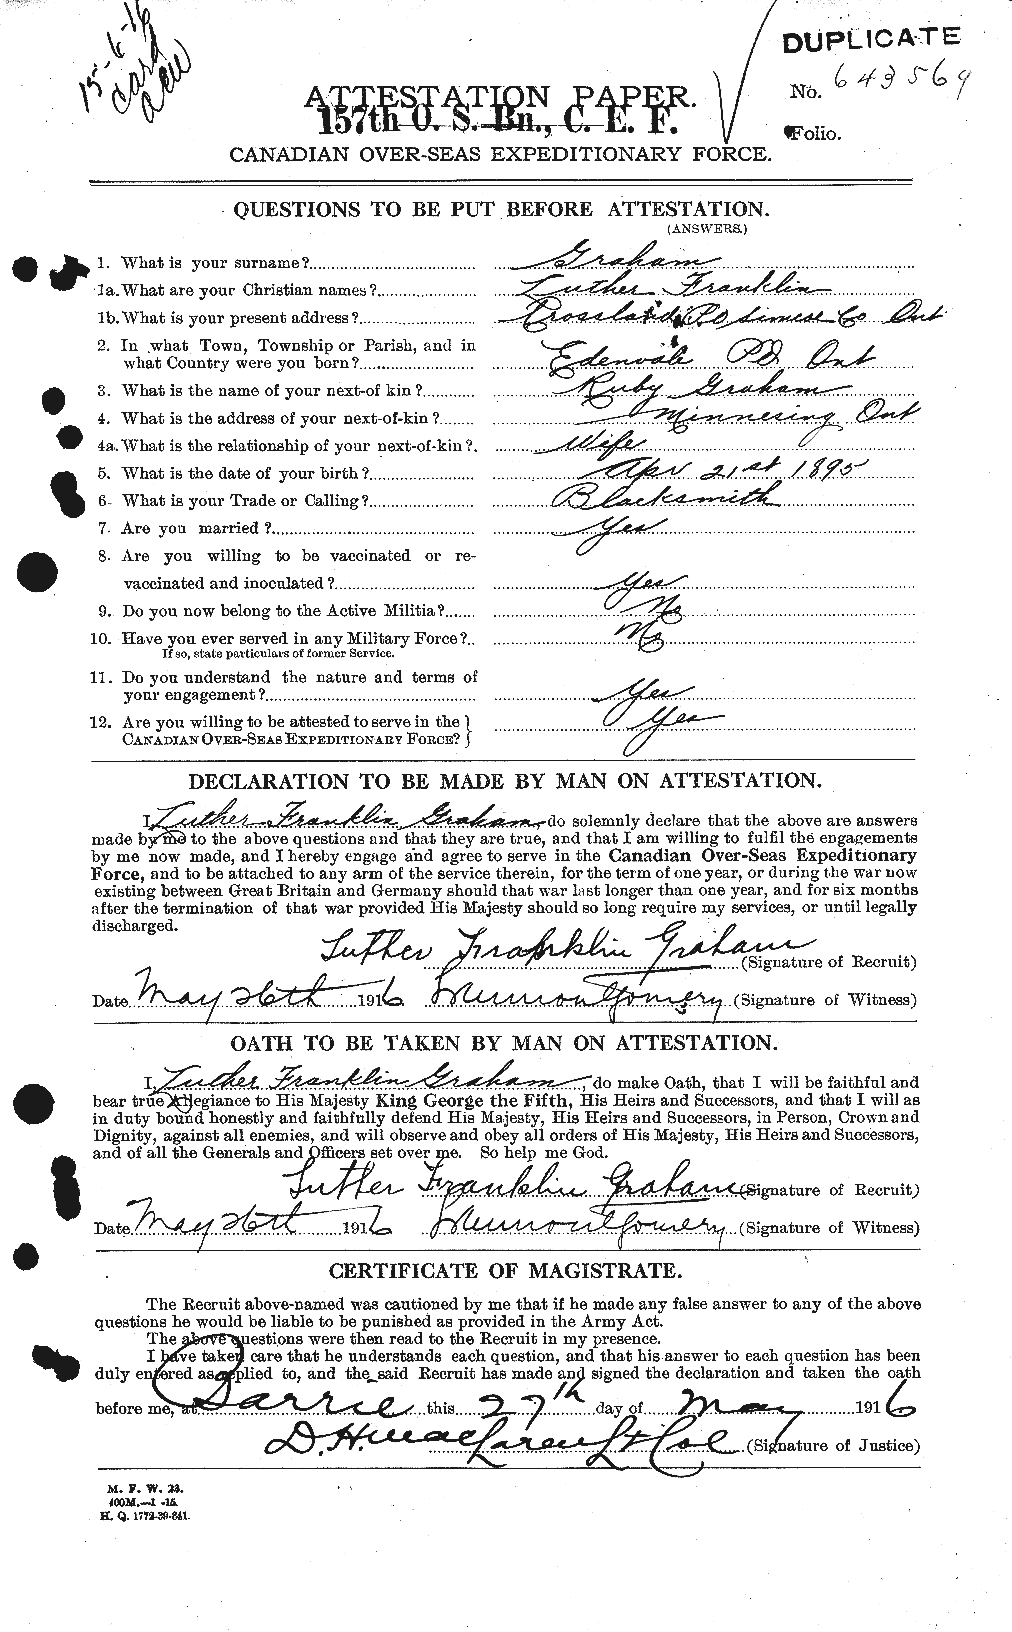 Personnel Records of the First World War - CEF 359283a